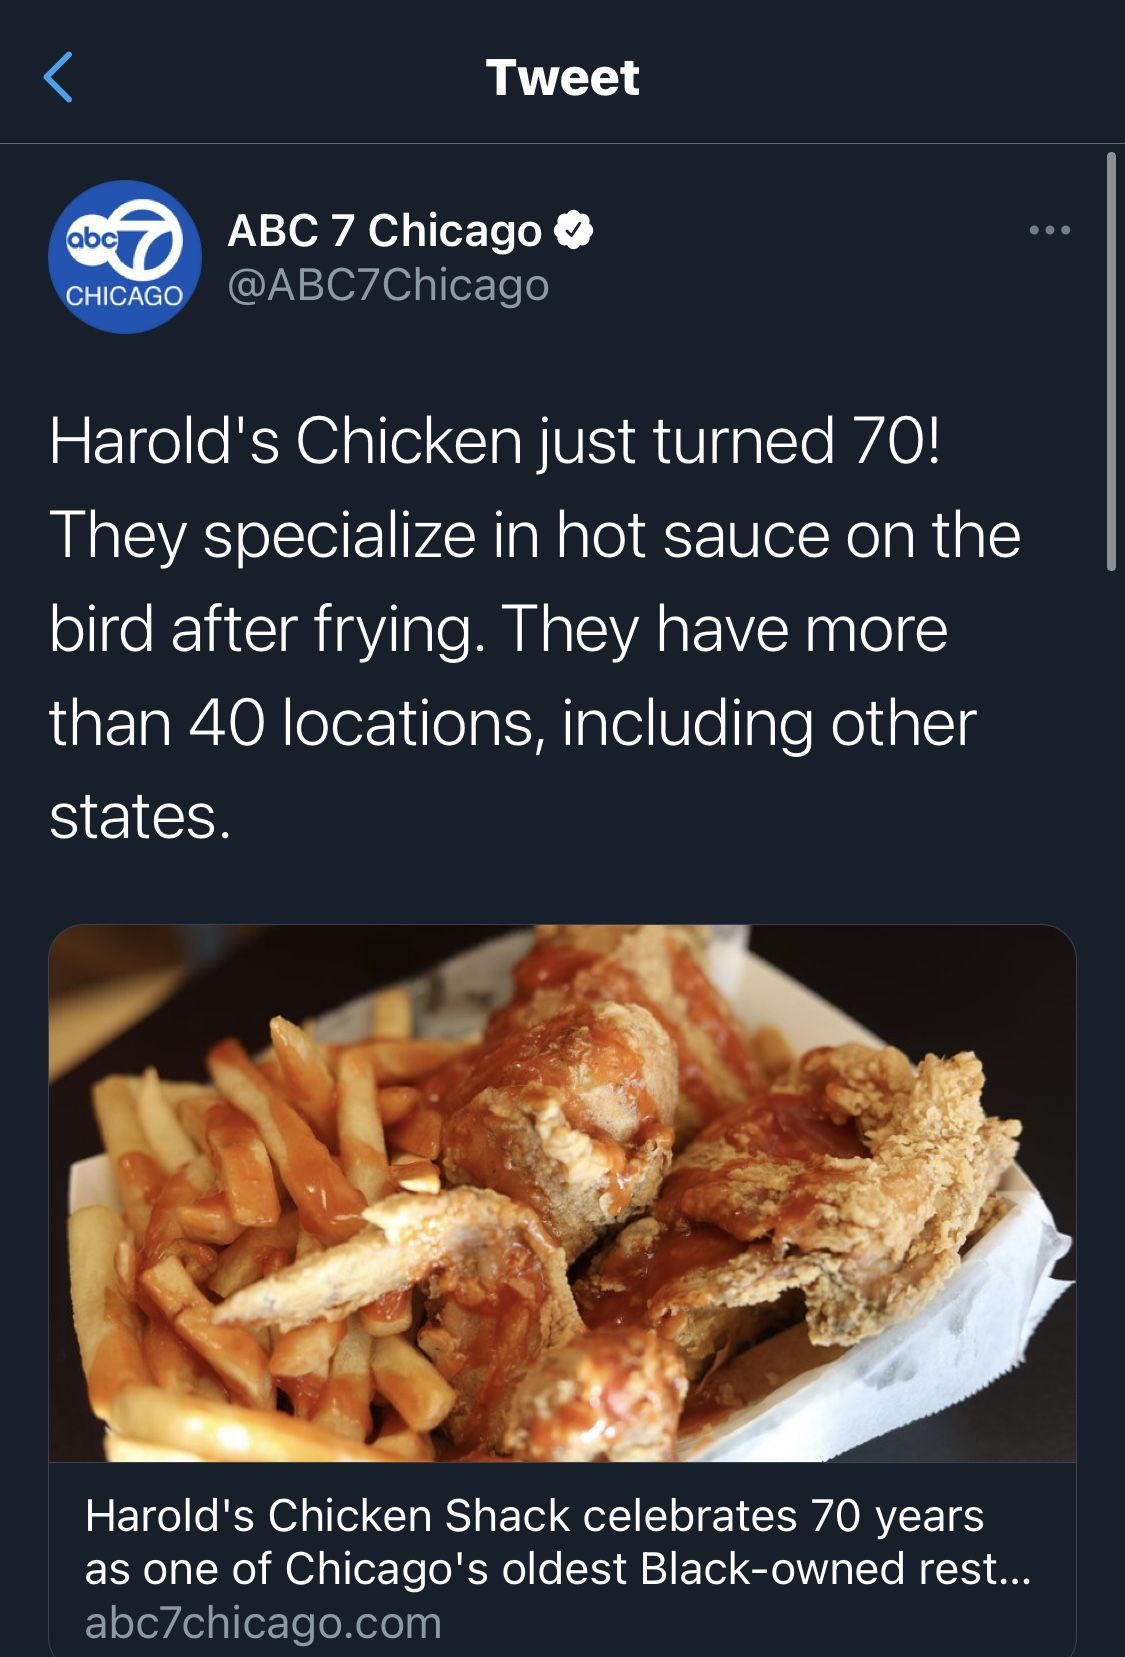 A tweet reading “Harold’s Chicken just turned 70!” the tweet started innocently before dying on the vine. “They specialize in hot sauce on the bird after frying. They have more than 40 locations, including other states.”